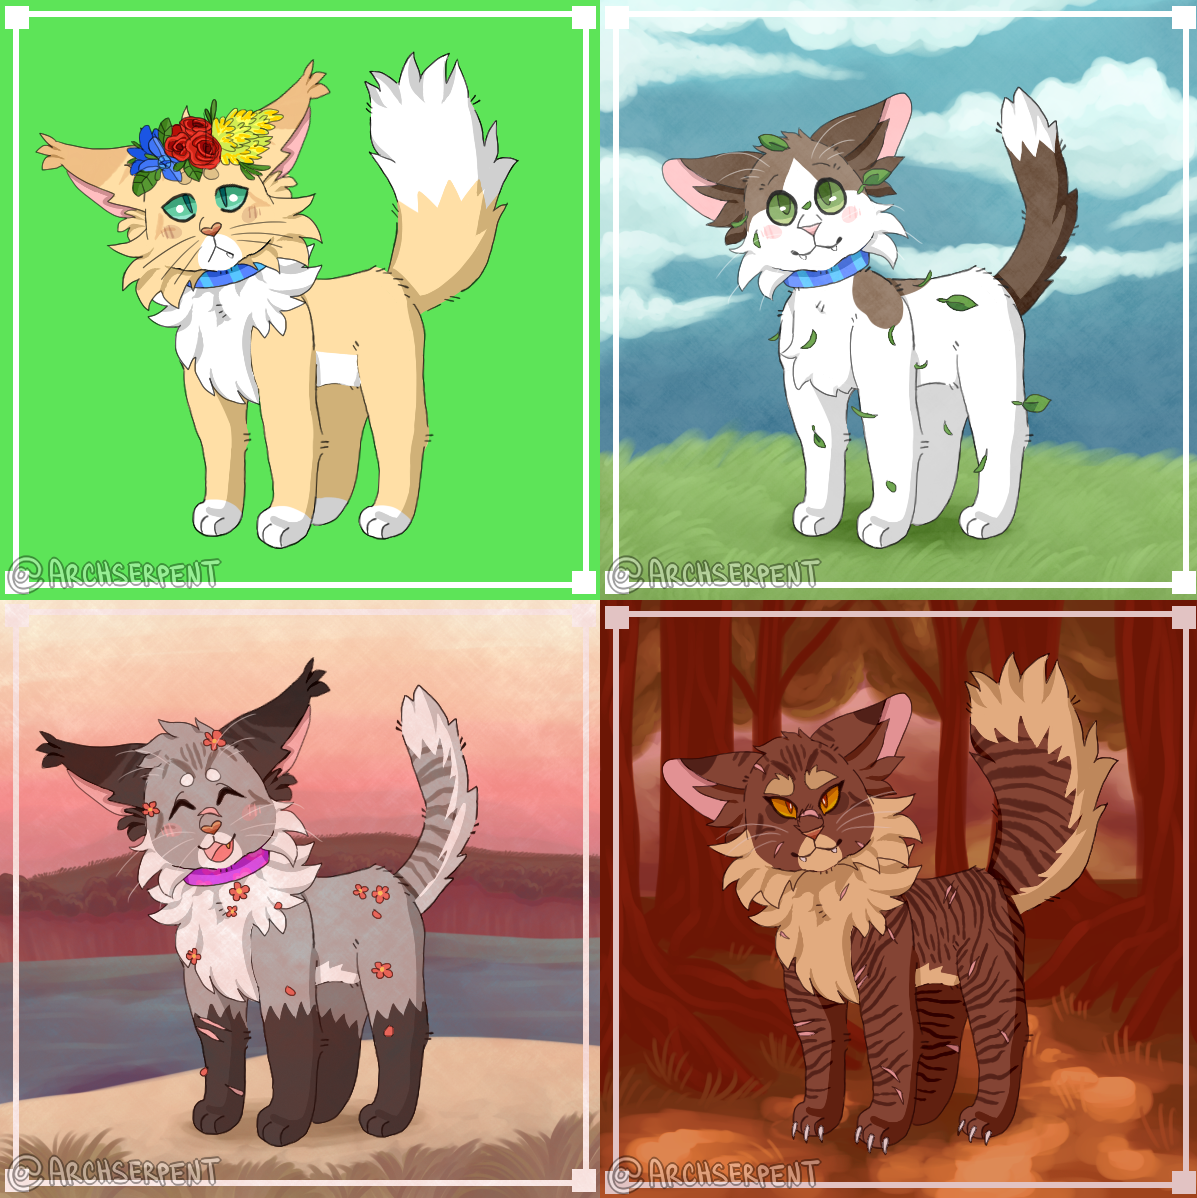 found another warrior cat maker on Picrew